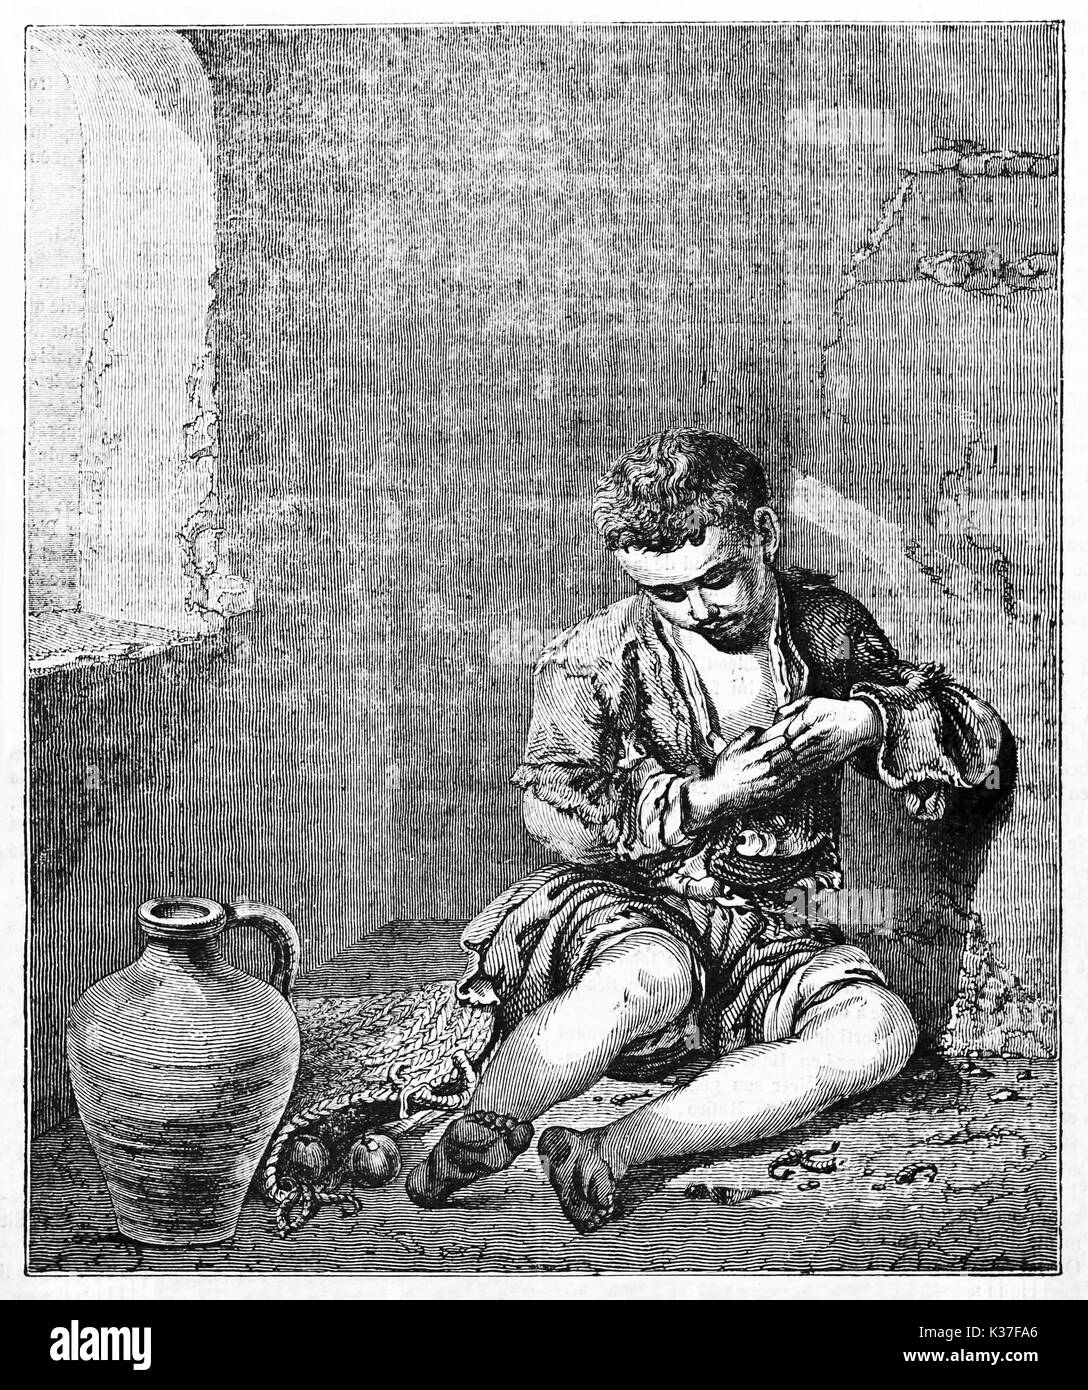 Old engraved reproduction of The Young Beggar, painting kept in Louvre museum, Paris. After Murillo, published on Magasin Pittoresque, Paris, 1834 Stock Photo